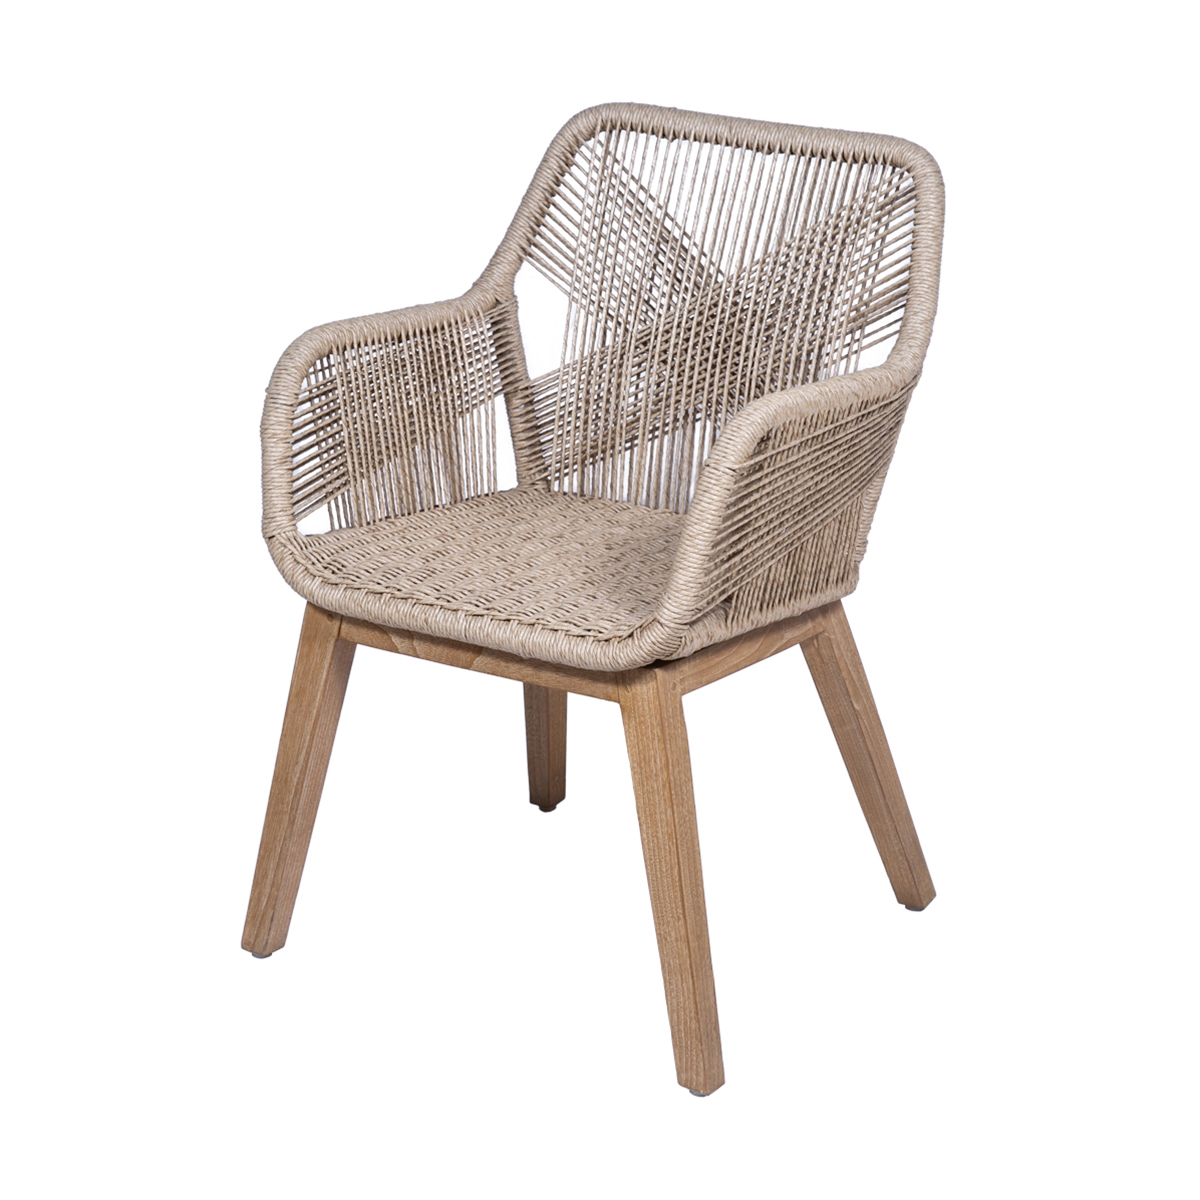 Alloa Rustic Teak Wood Woven Rope Dining Chair